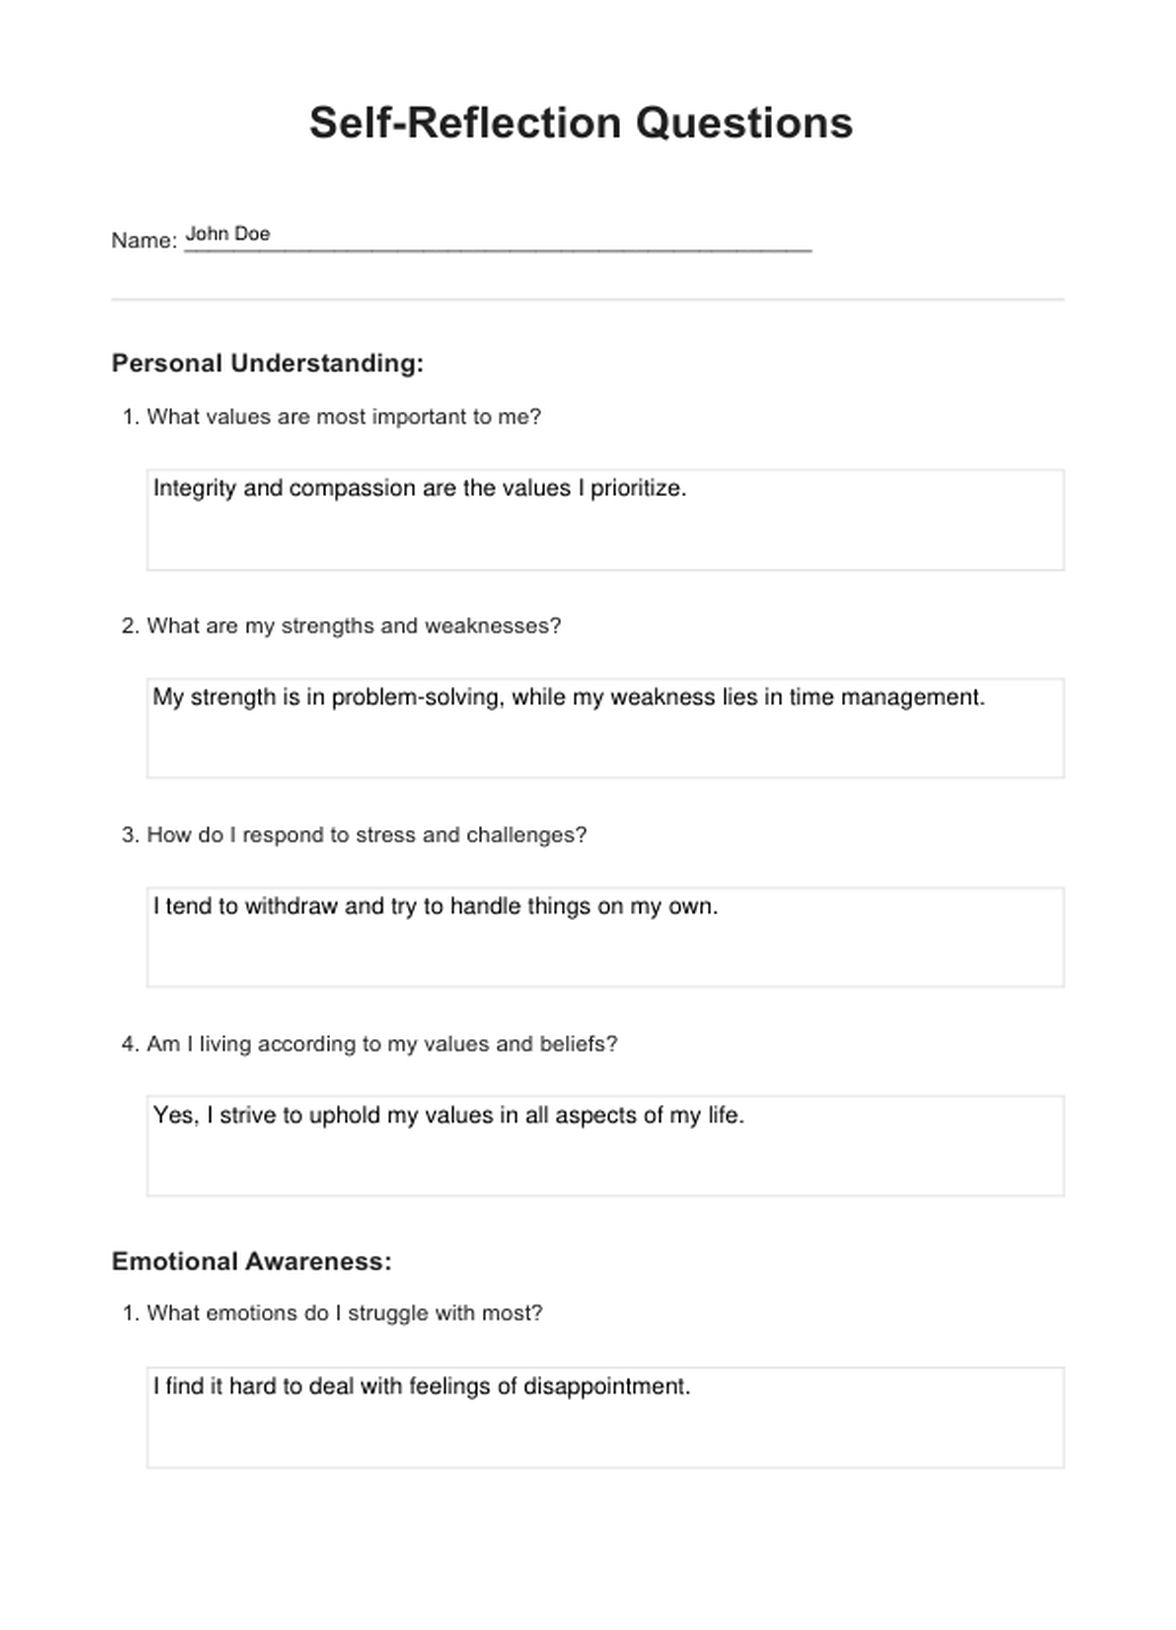 Self-reflection Questions PDF Example